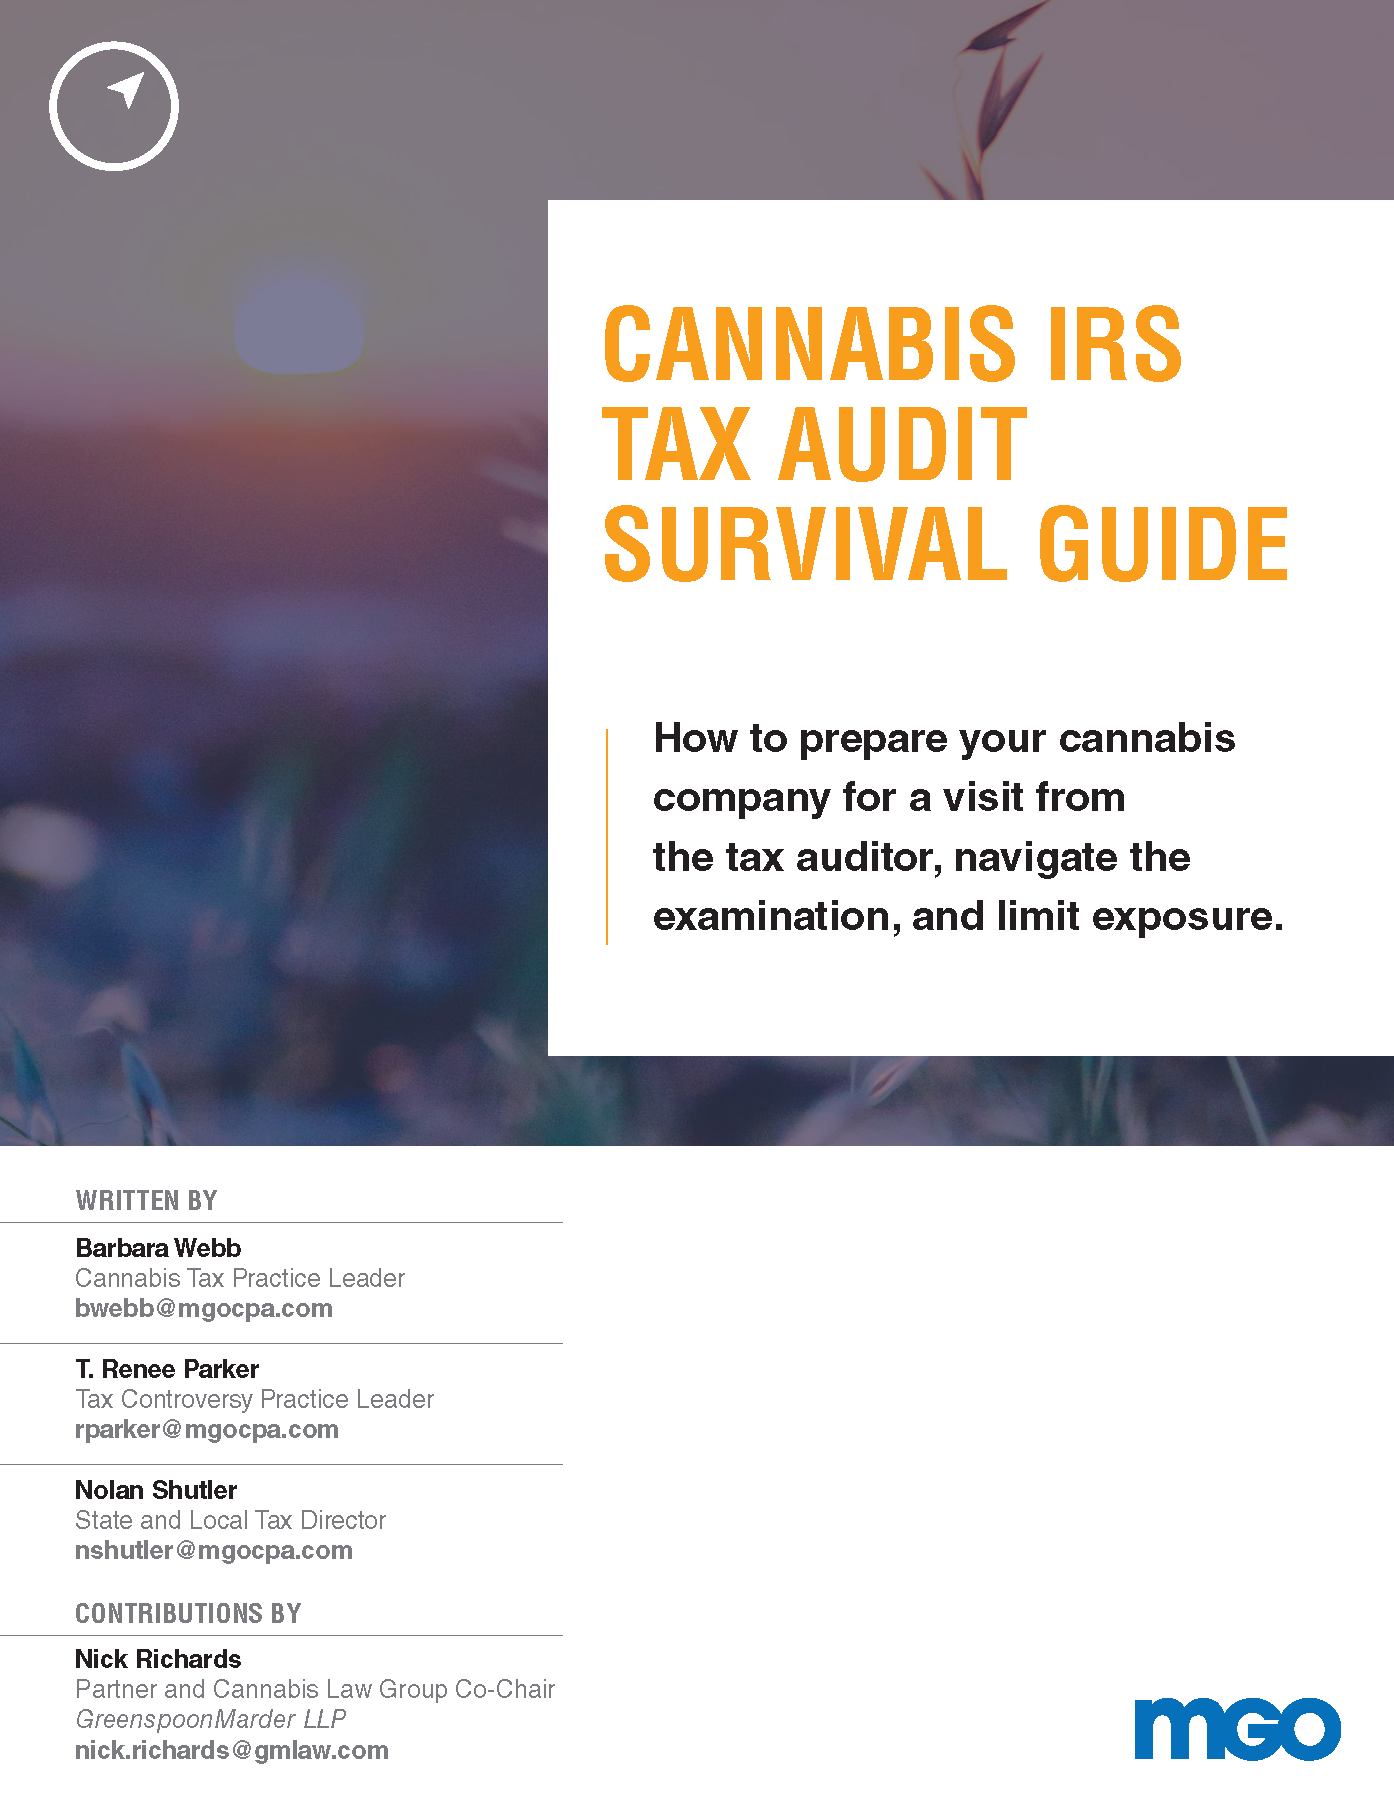 MGO Cannabis IRS Audit Survival Guide Cover_Page_01